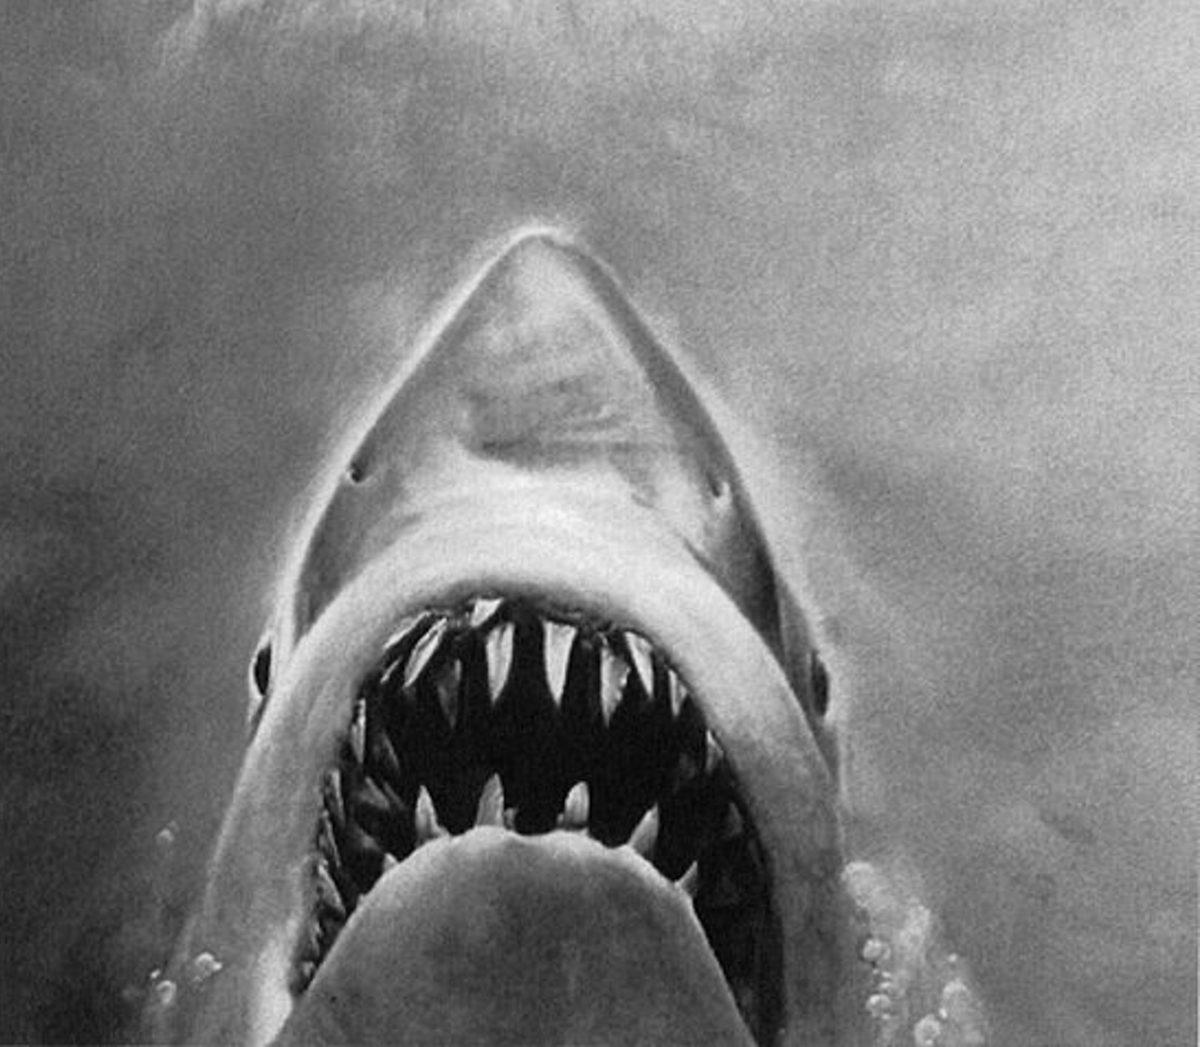 The+main+antagonist+of+the+Jaws+franchise%2C+Bruce%2C+swims+toward+the+ocean+surface+on+the+1975+Jaws+book+cover.%0APhoto+courtesy+of+WikimediaCommons